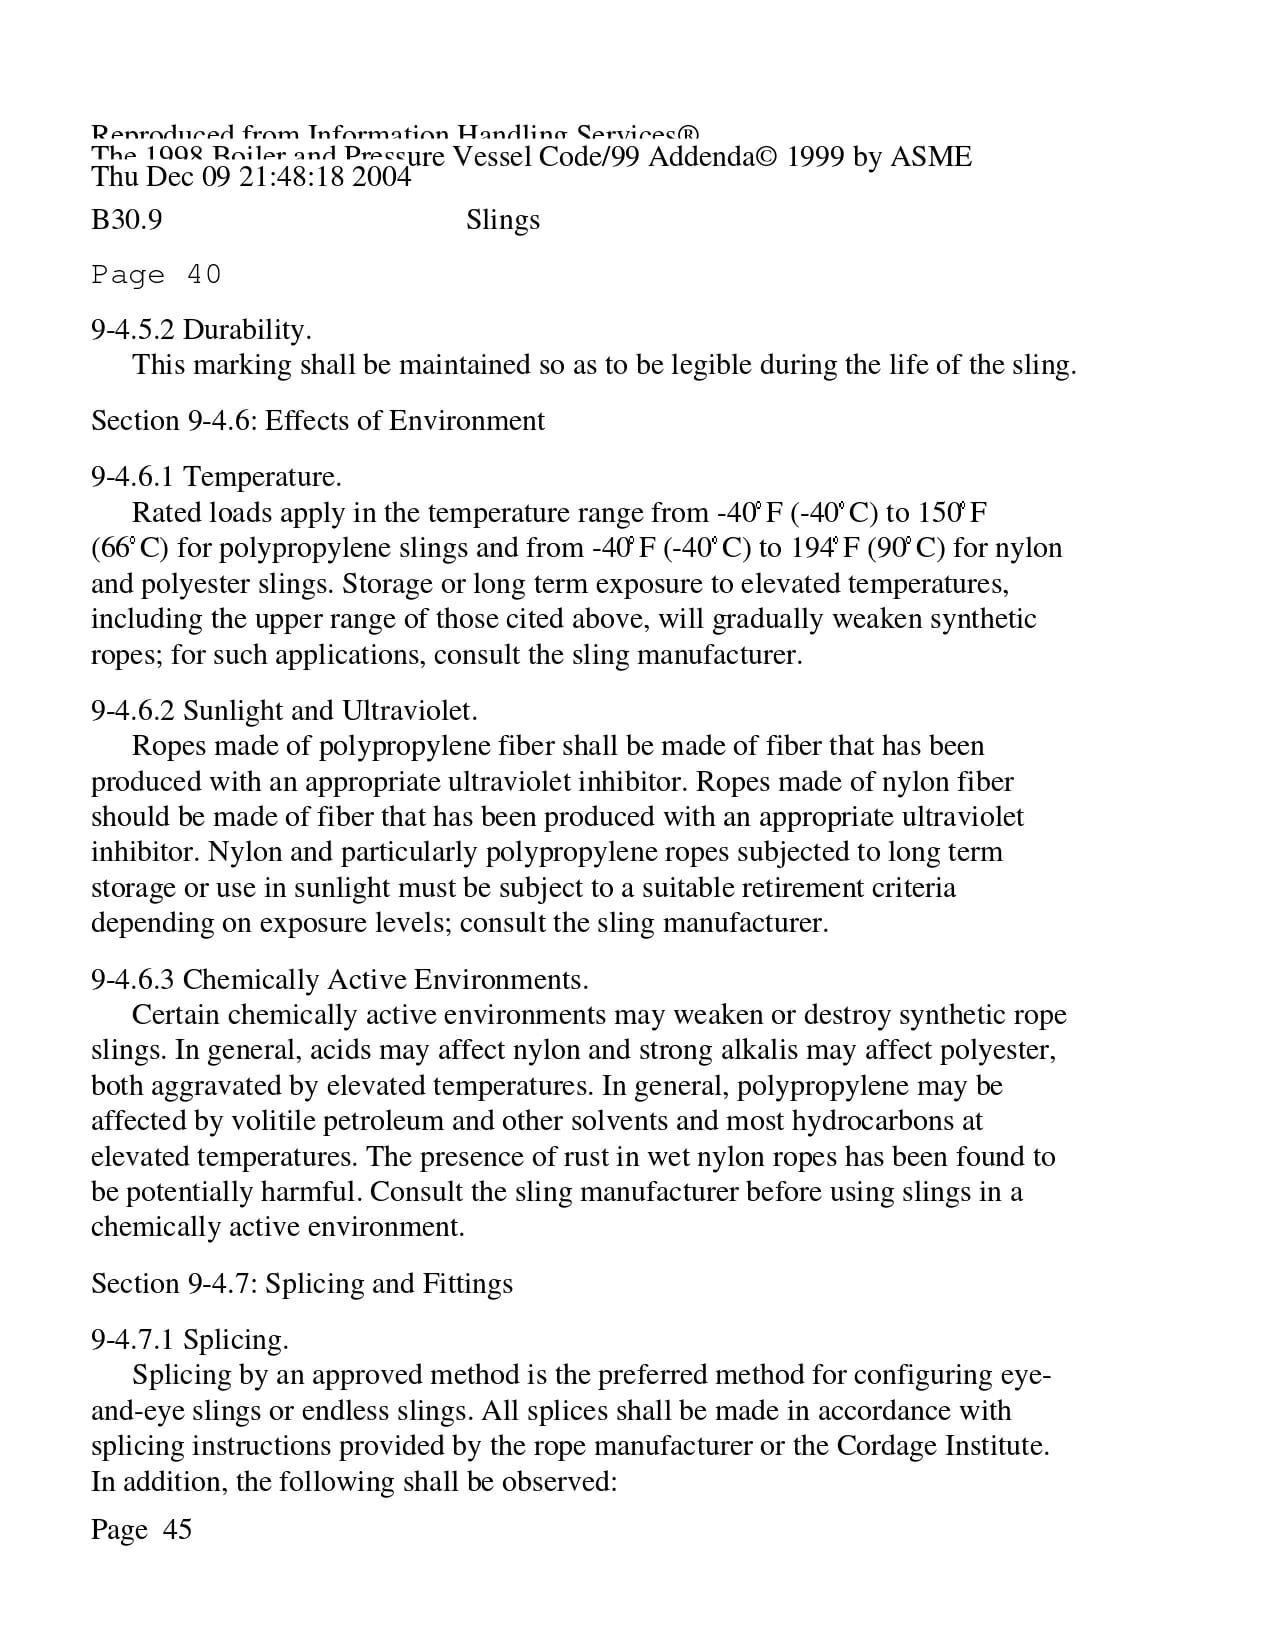 vdocument.in_asme-b309_page-0045